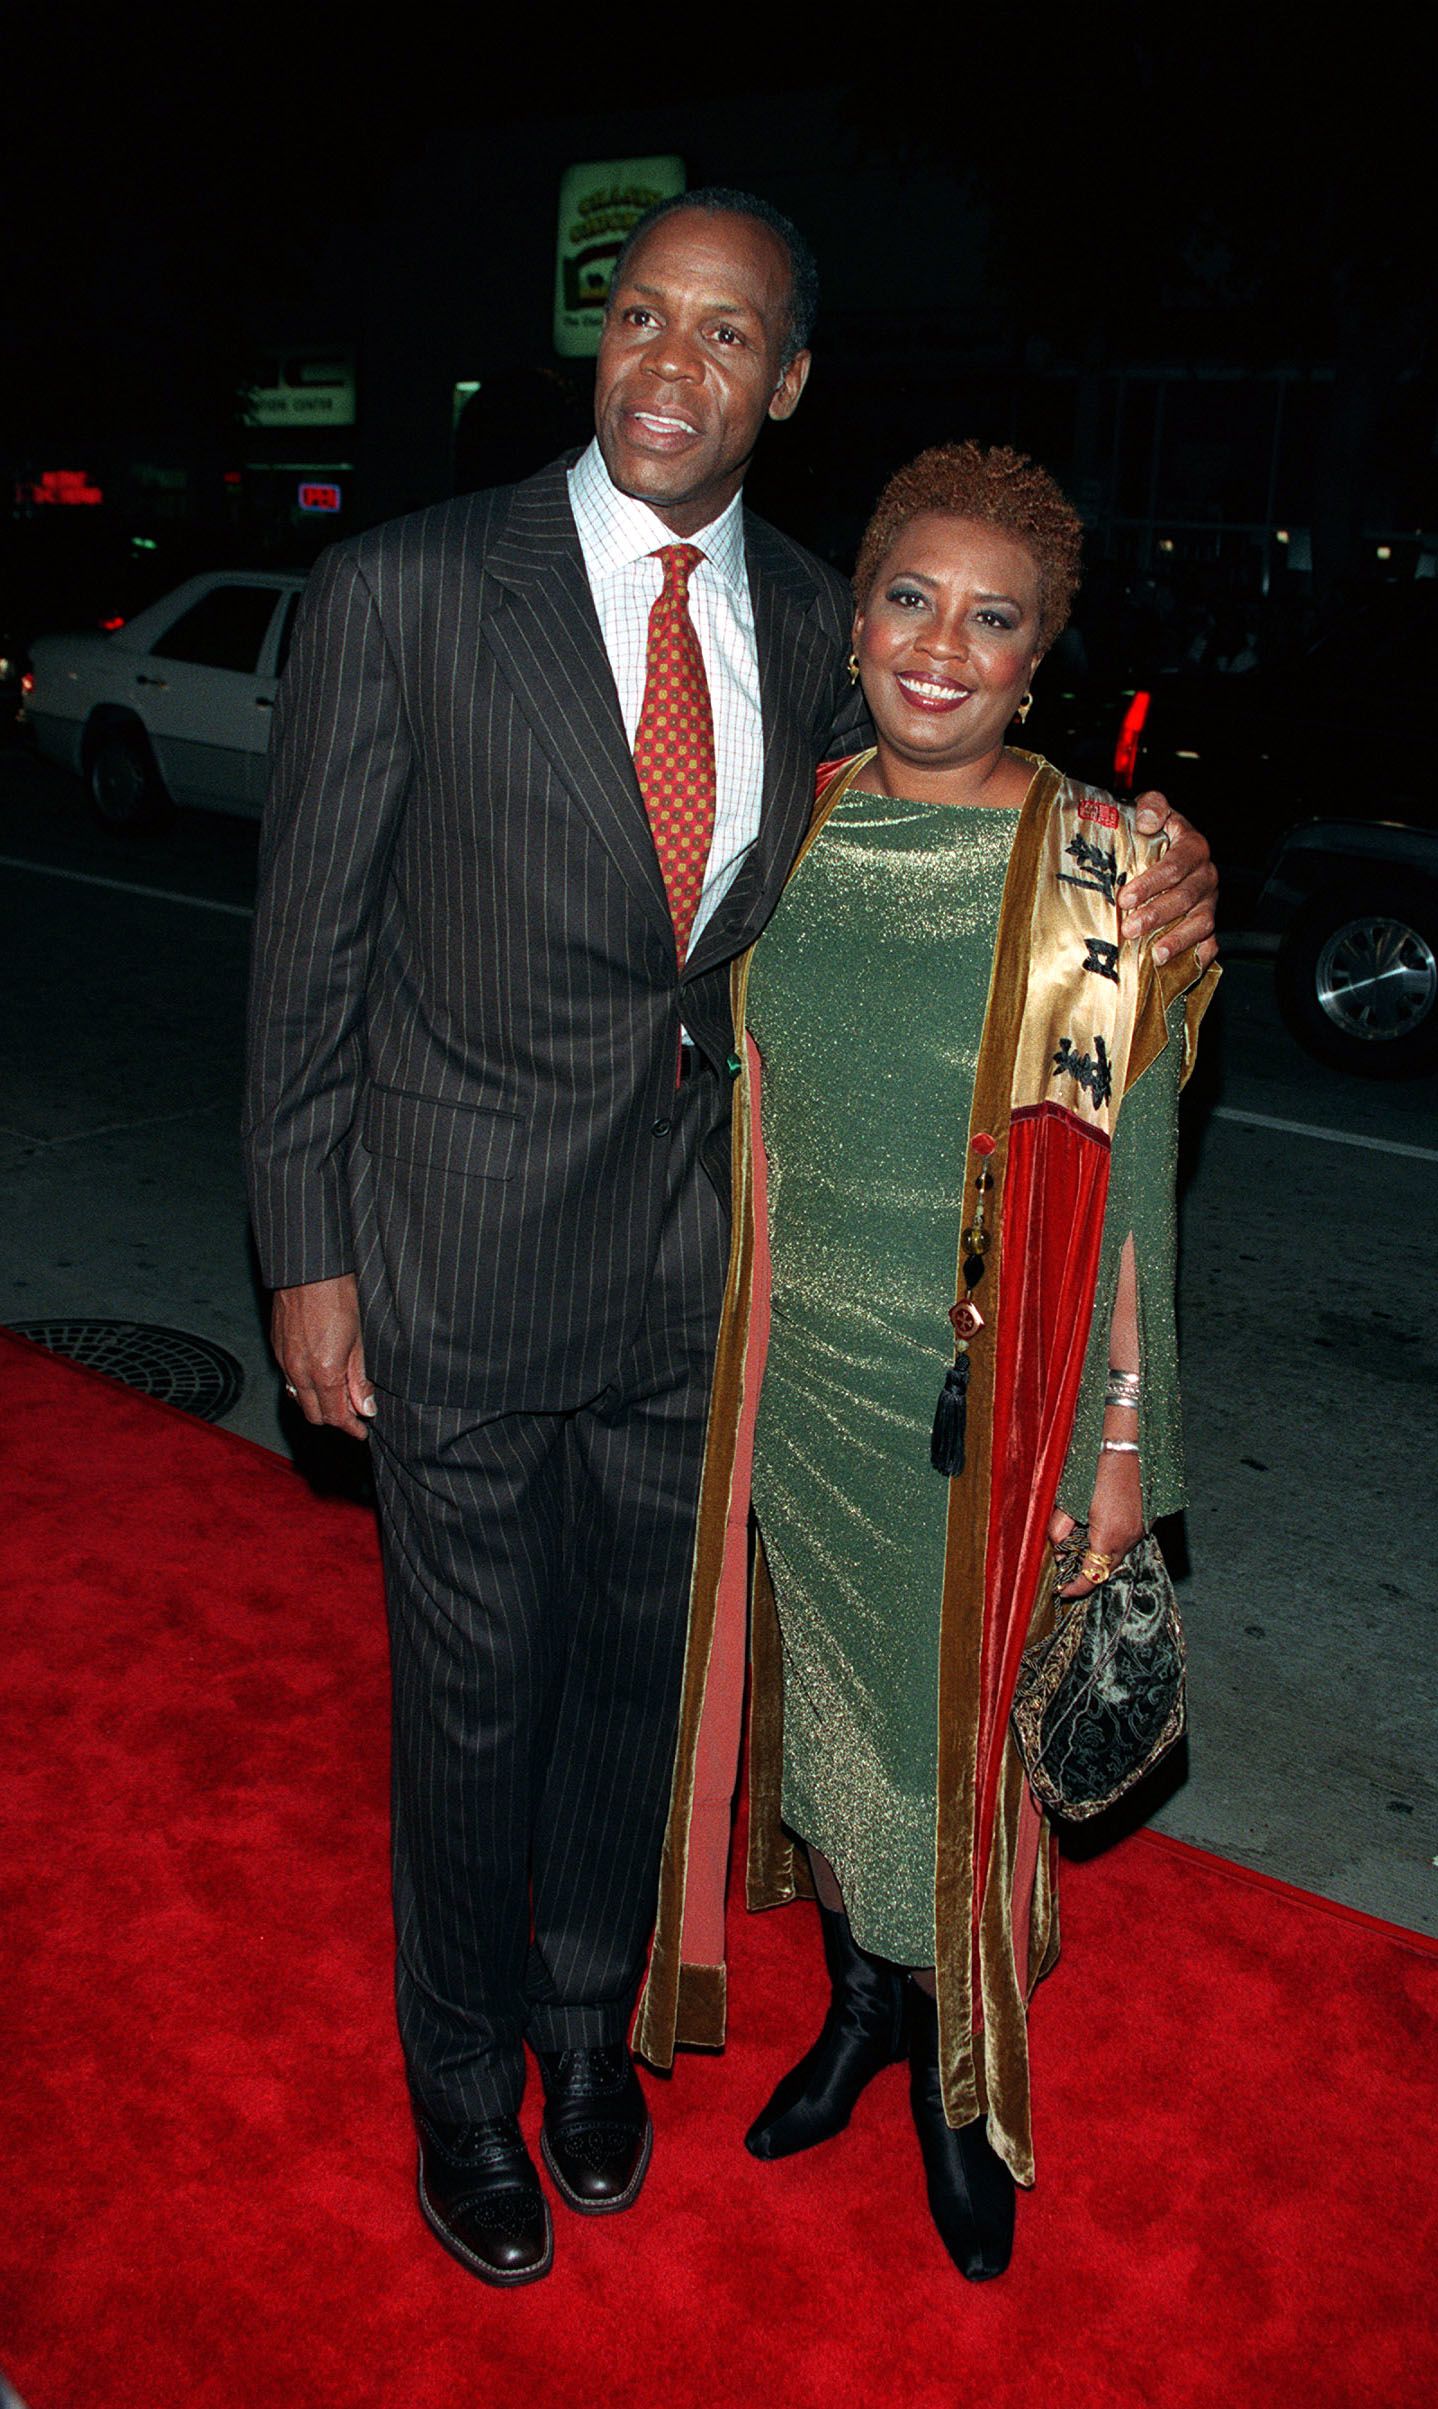 Danny Glover with Asake Bomani at the Westwood premiere of "Beloved" on October 12, 1998. | Source: Frank Trapper/Corbis/Getty Images